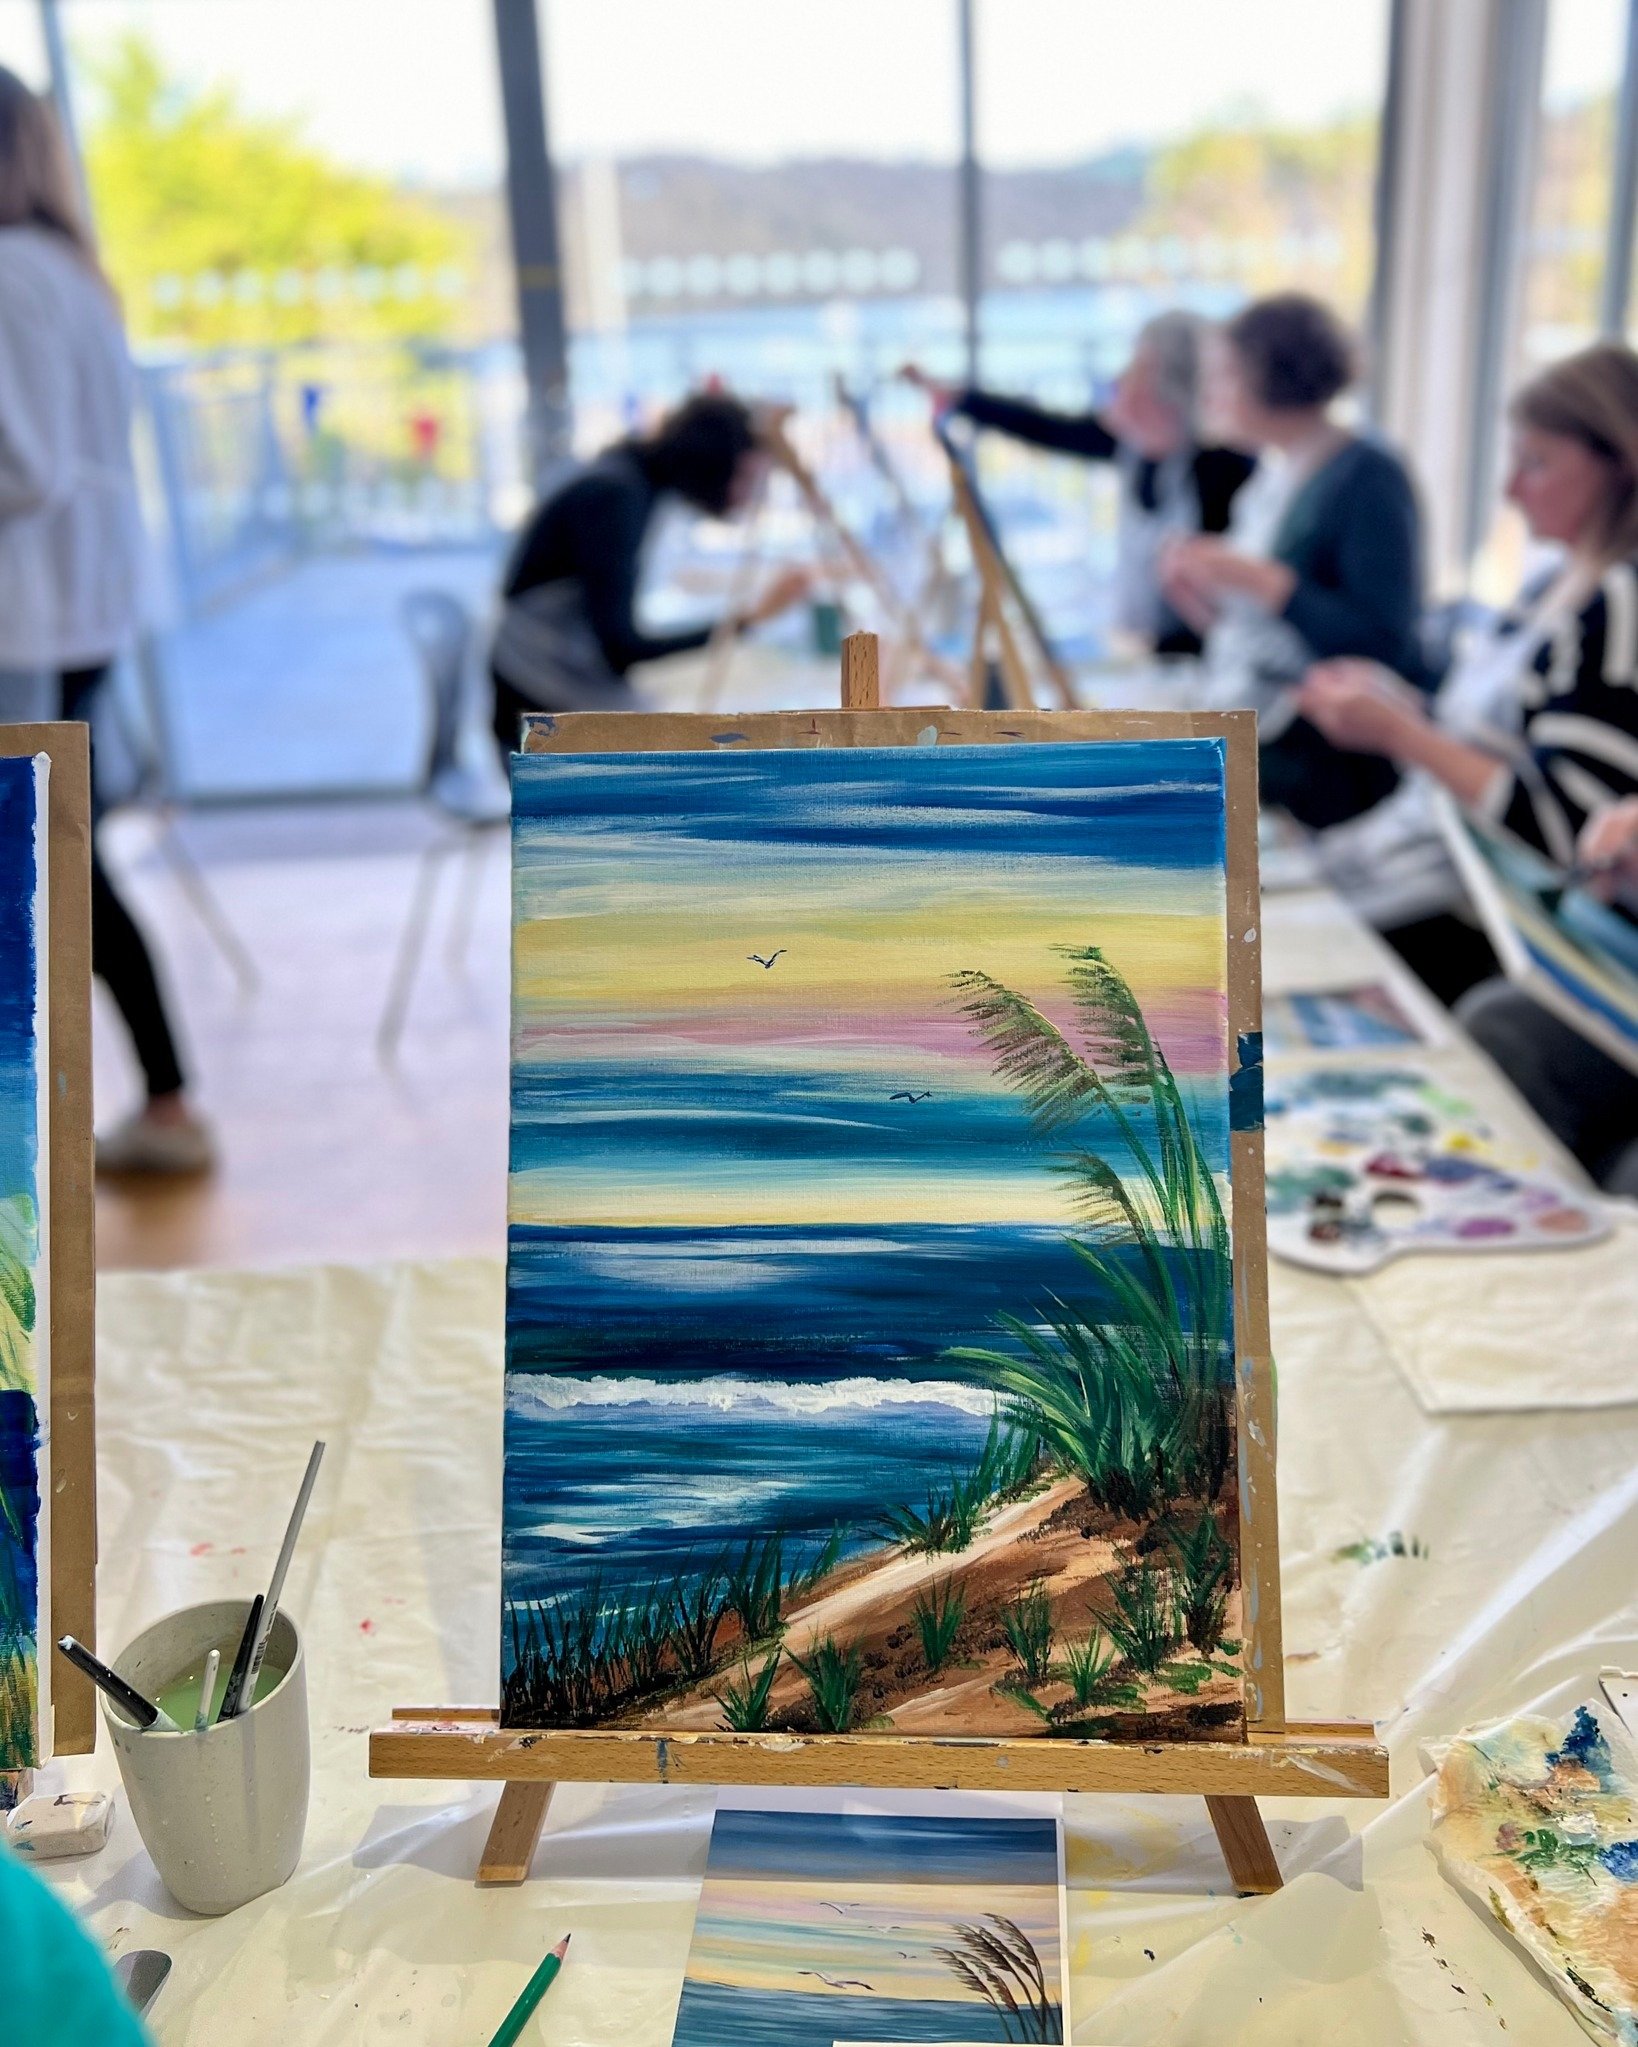 Can you believe it's May already? 🌷 

Time flies when you're having fun and creating art. If you've been thinking about joining one of our workshops, now's the time! Spaces are filling up quickly.

#MayArt #CreateWithUs #artandwinecornwall #cornwall